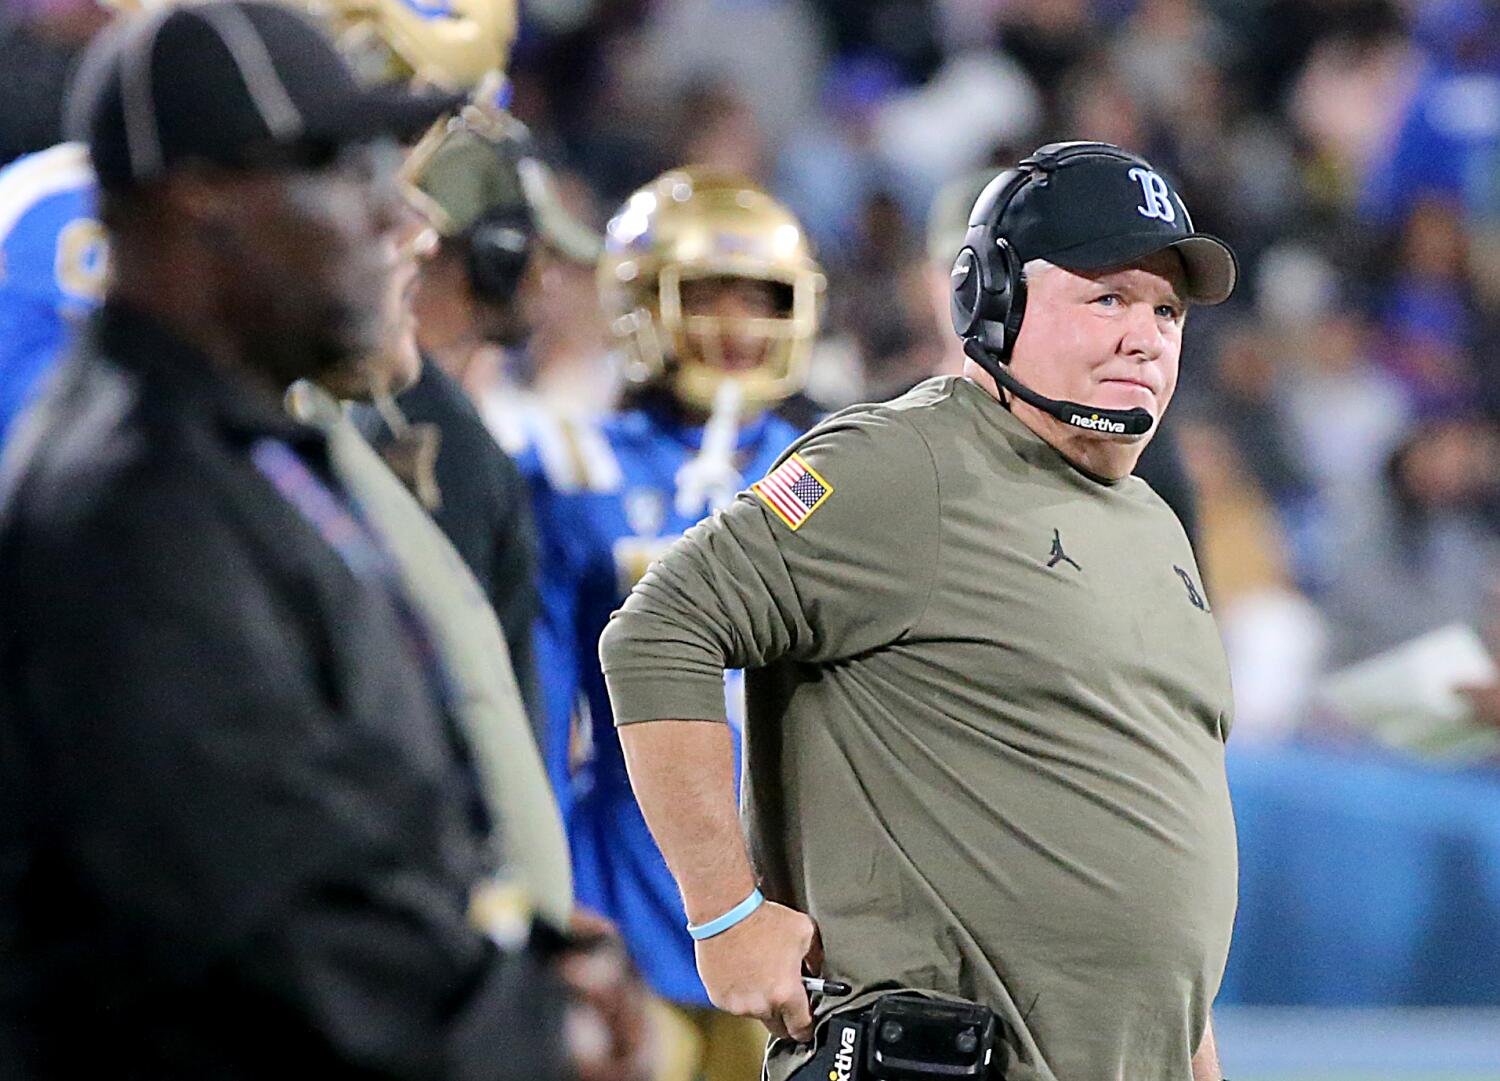 Plaschke: To give UCLA football any shot at relevancy in Big Ten, Chip Kelly must go